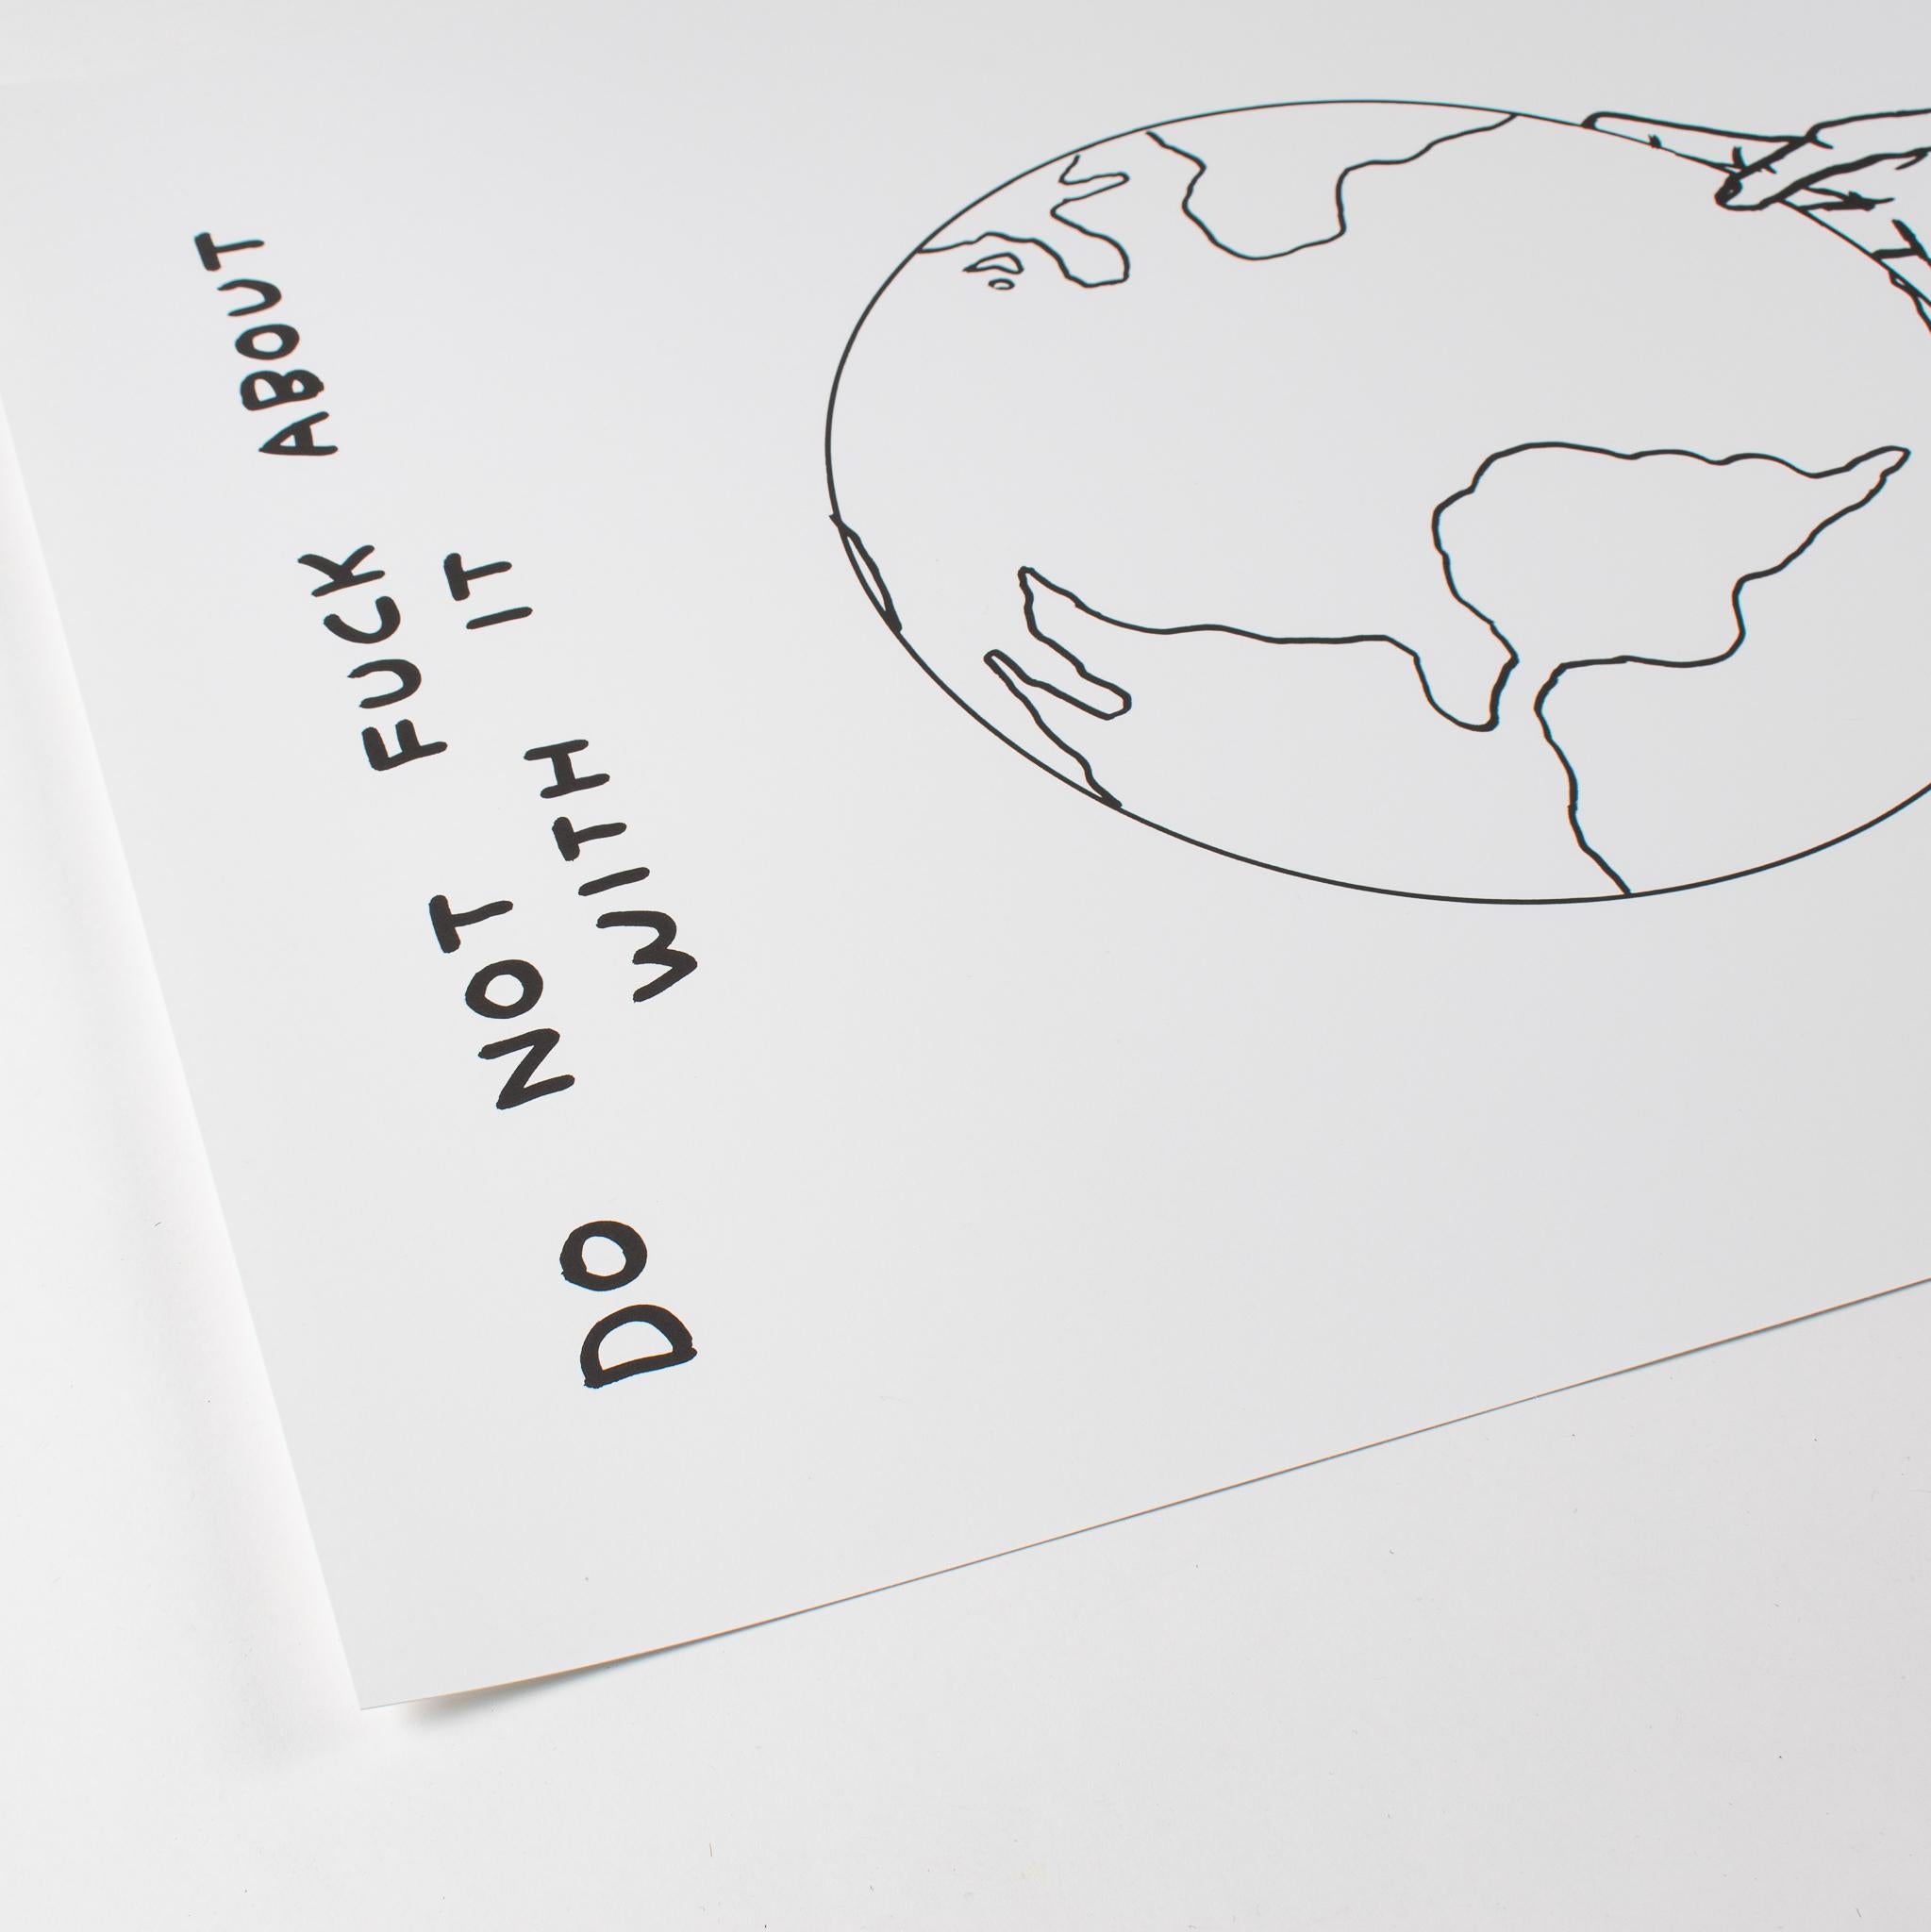 Do Not Fuck About With It - Print by David Shrigley